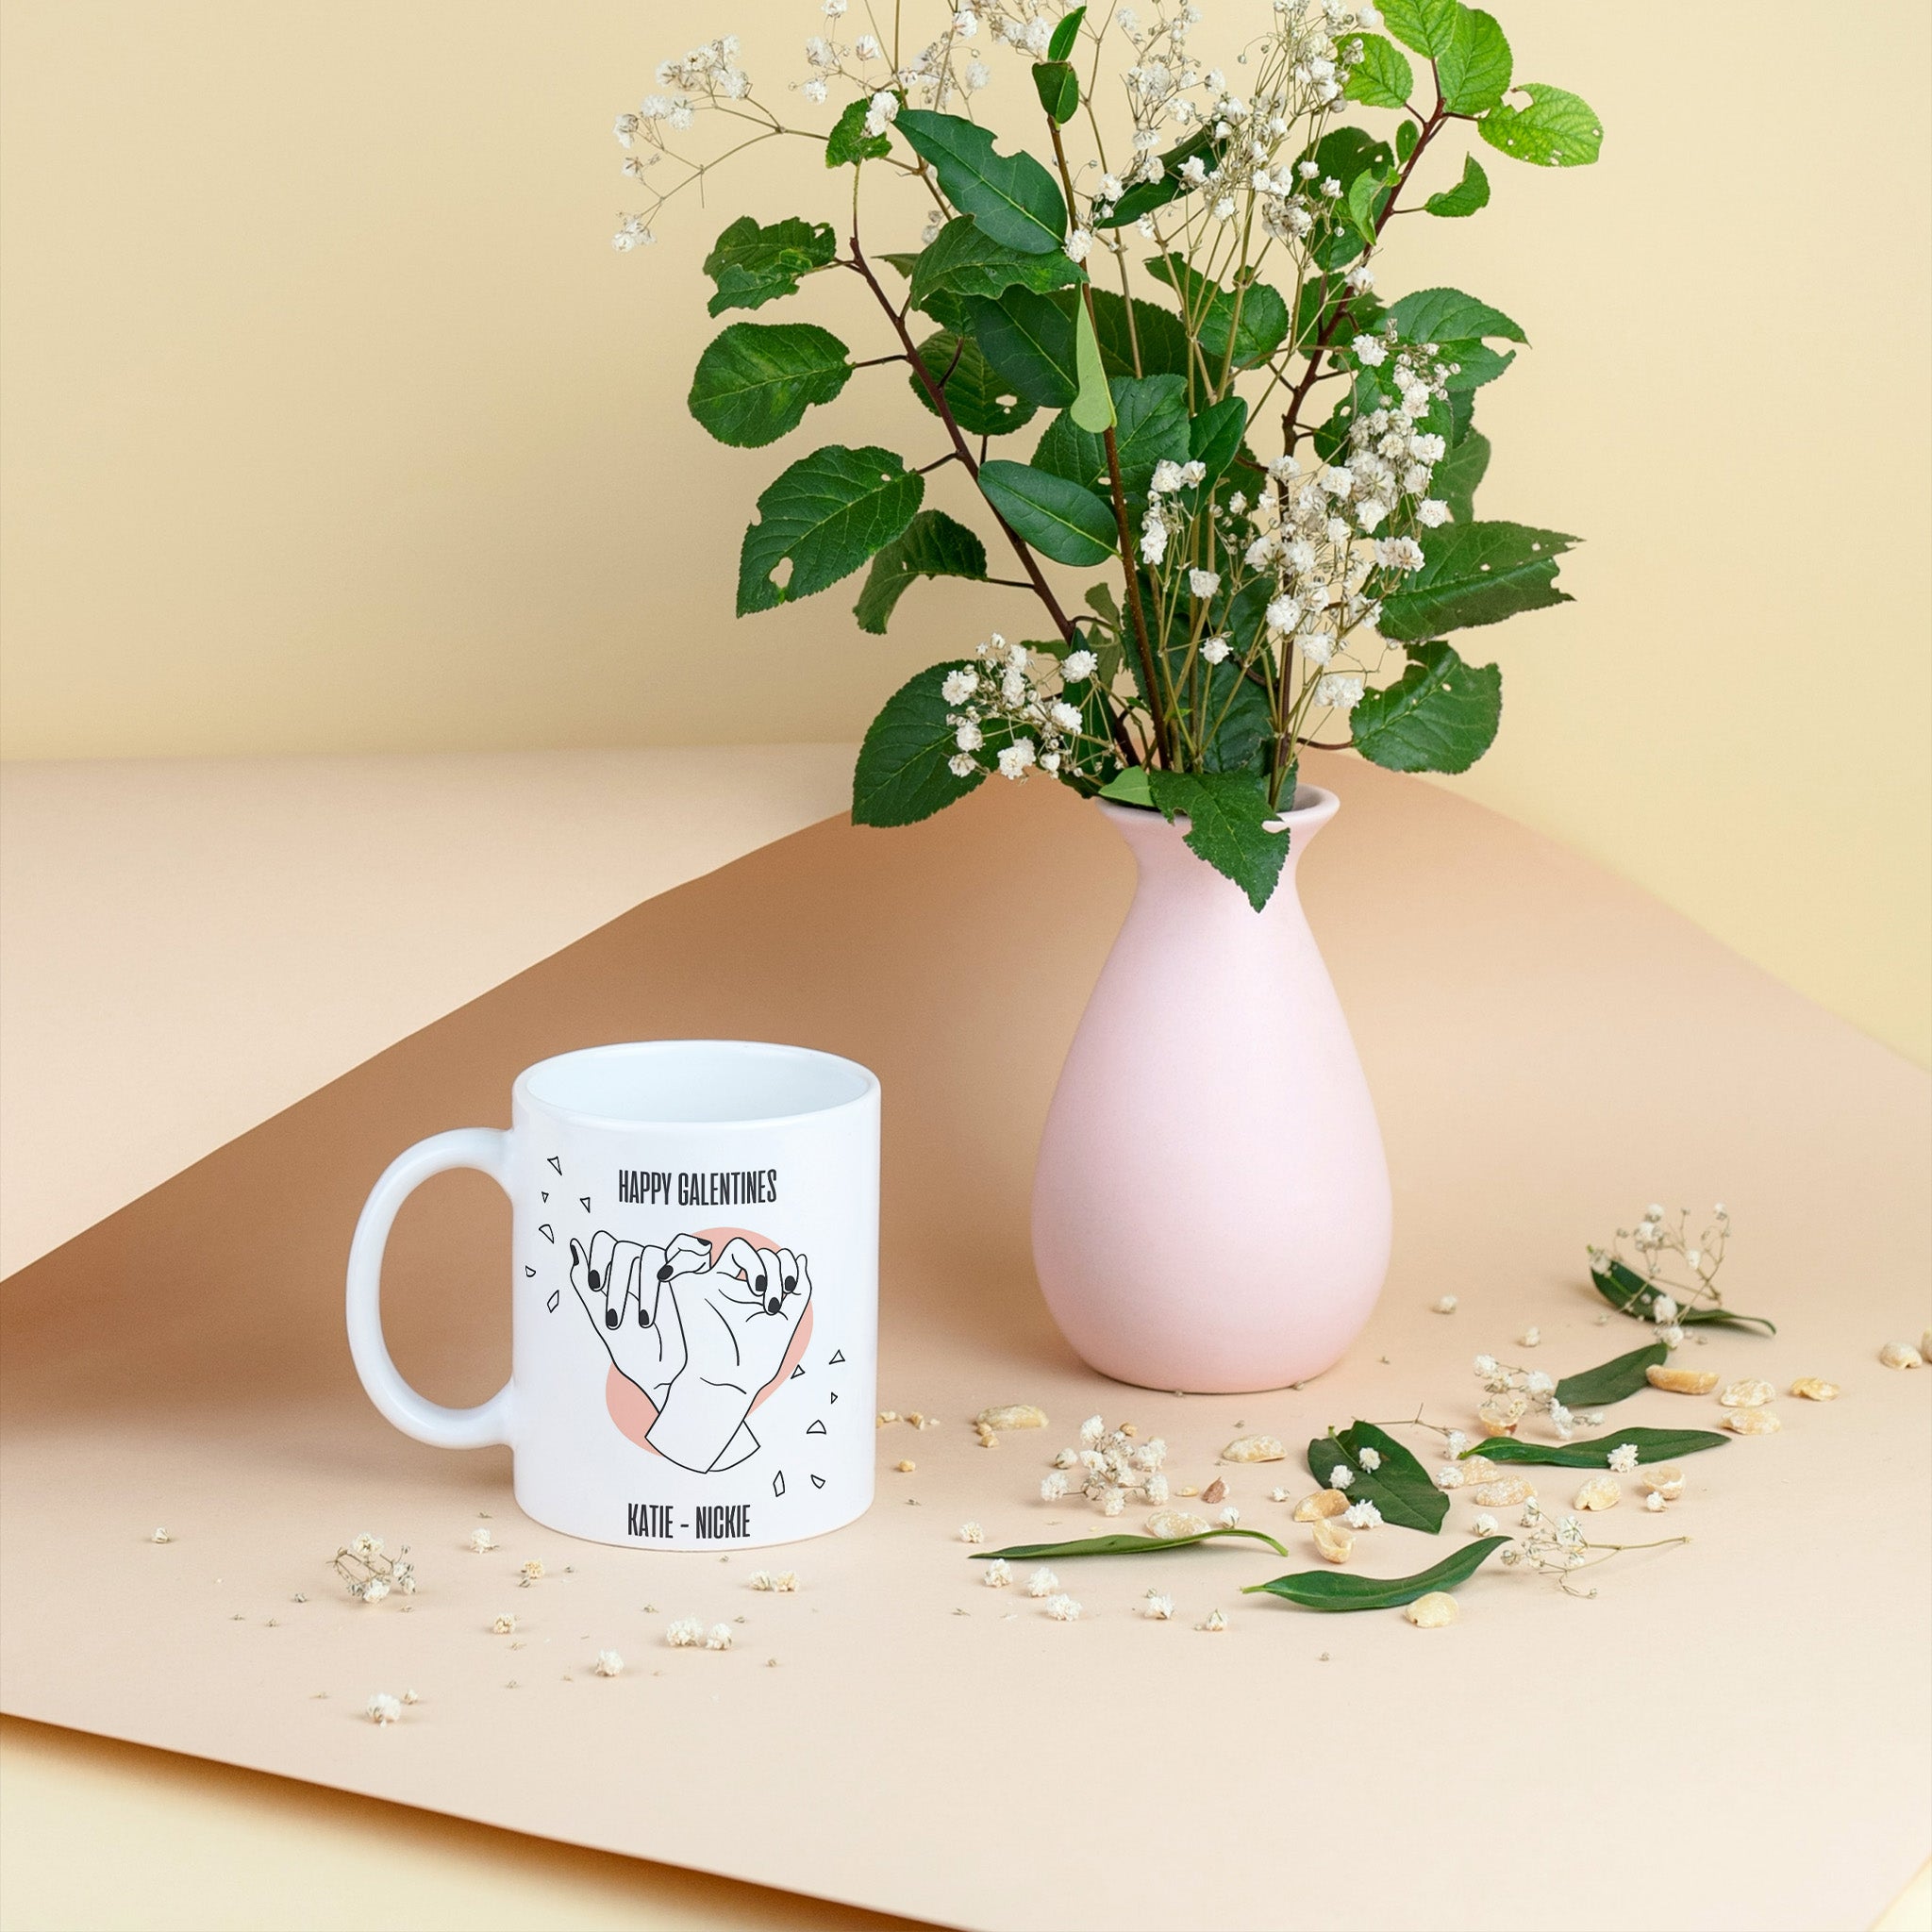 Funny Happy Galentines gift